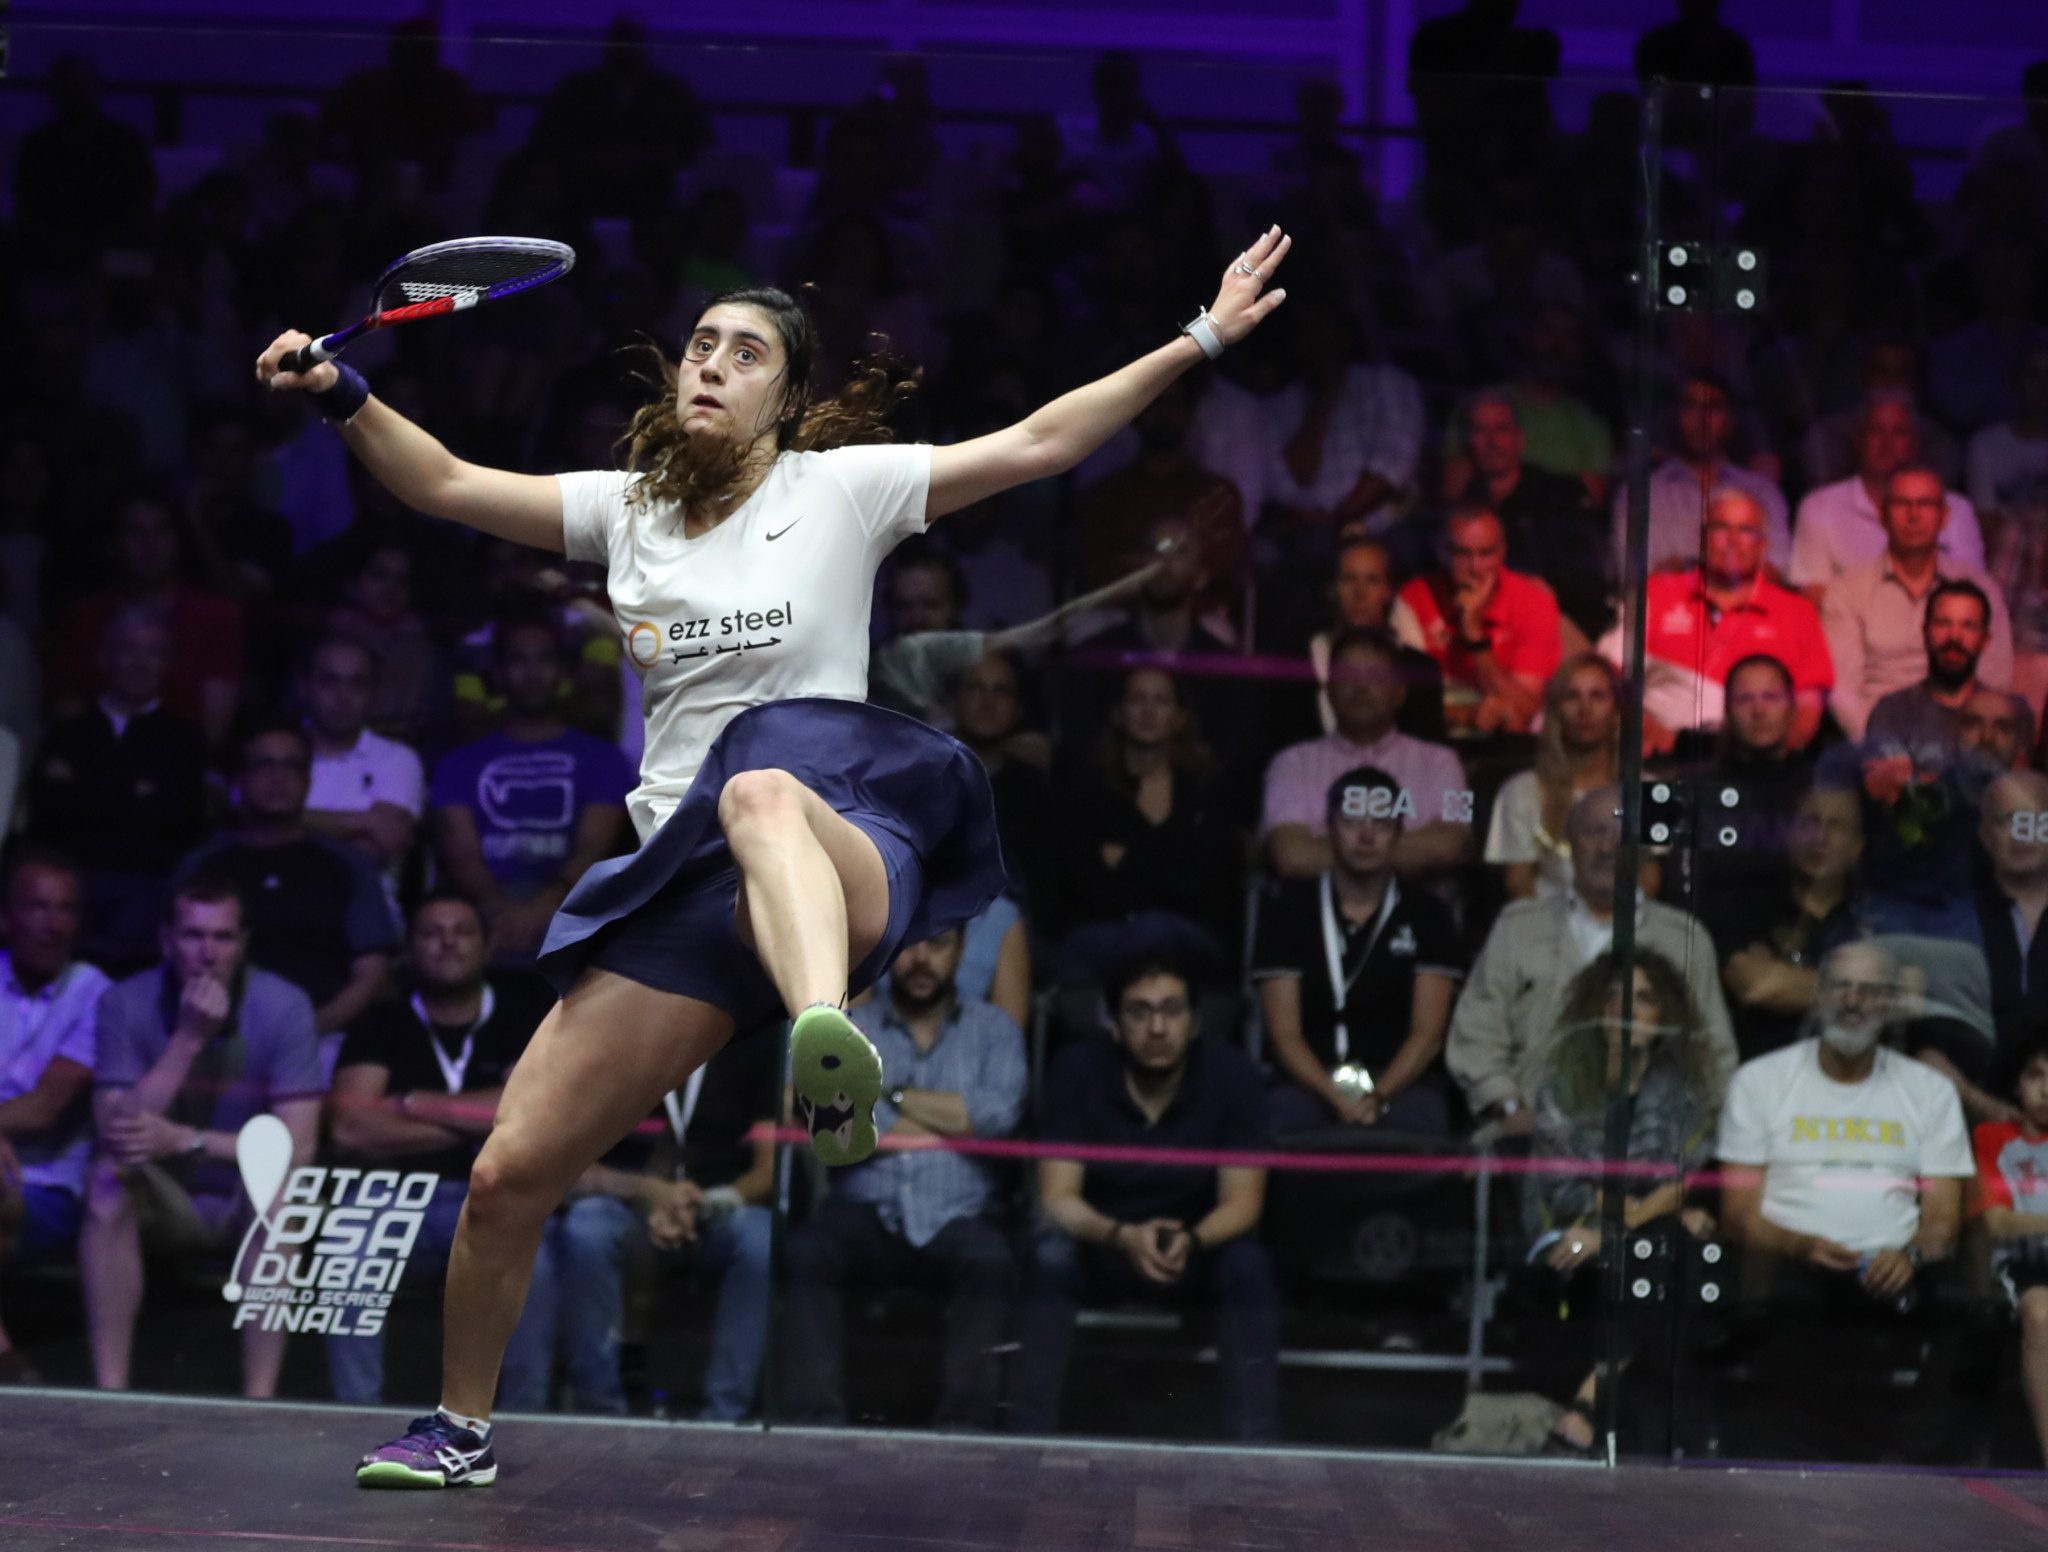 World champions El Sherbini and Farag eliminated in PSA Tour Finals group stage